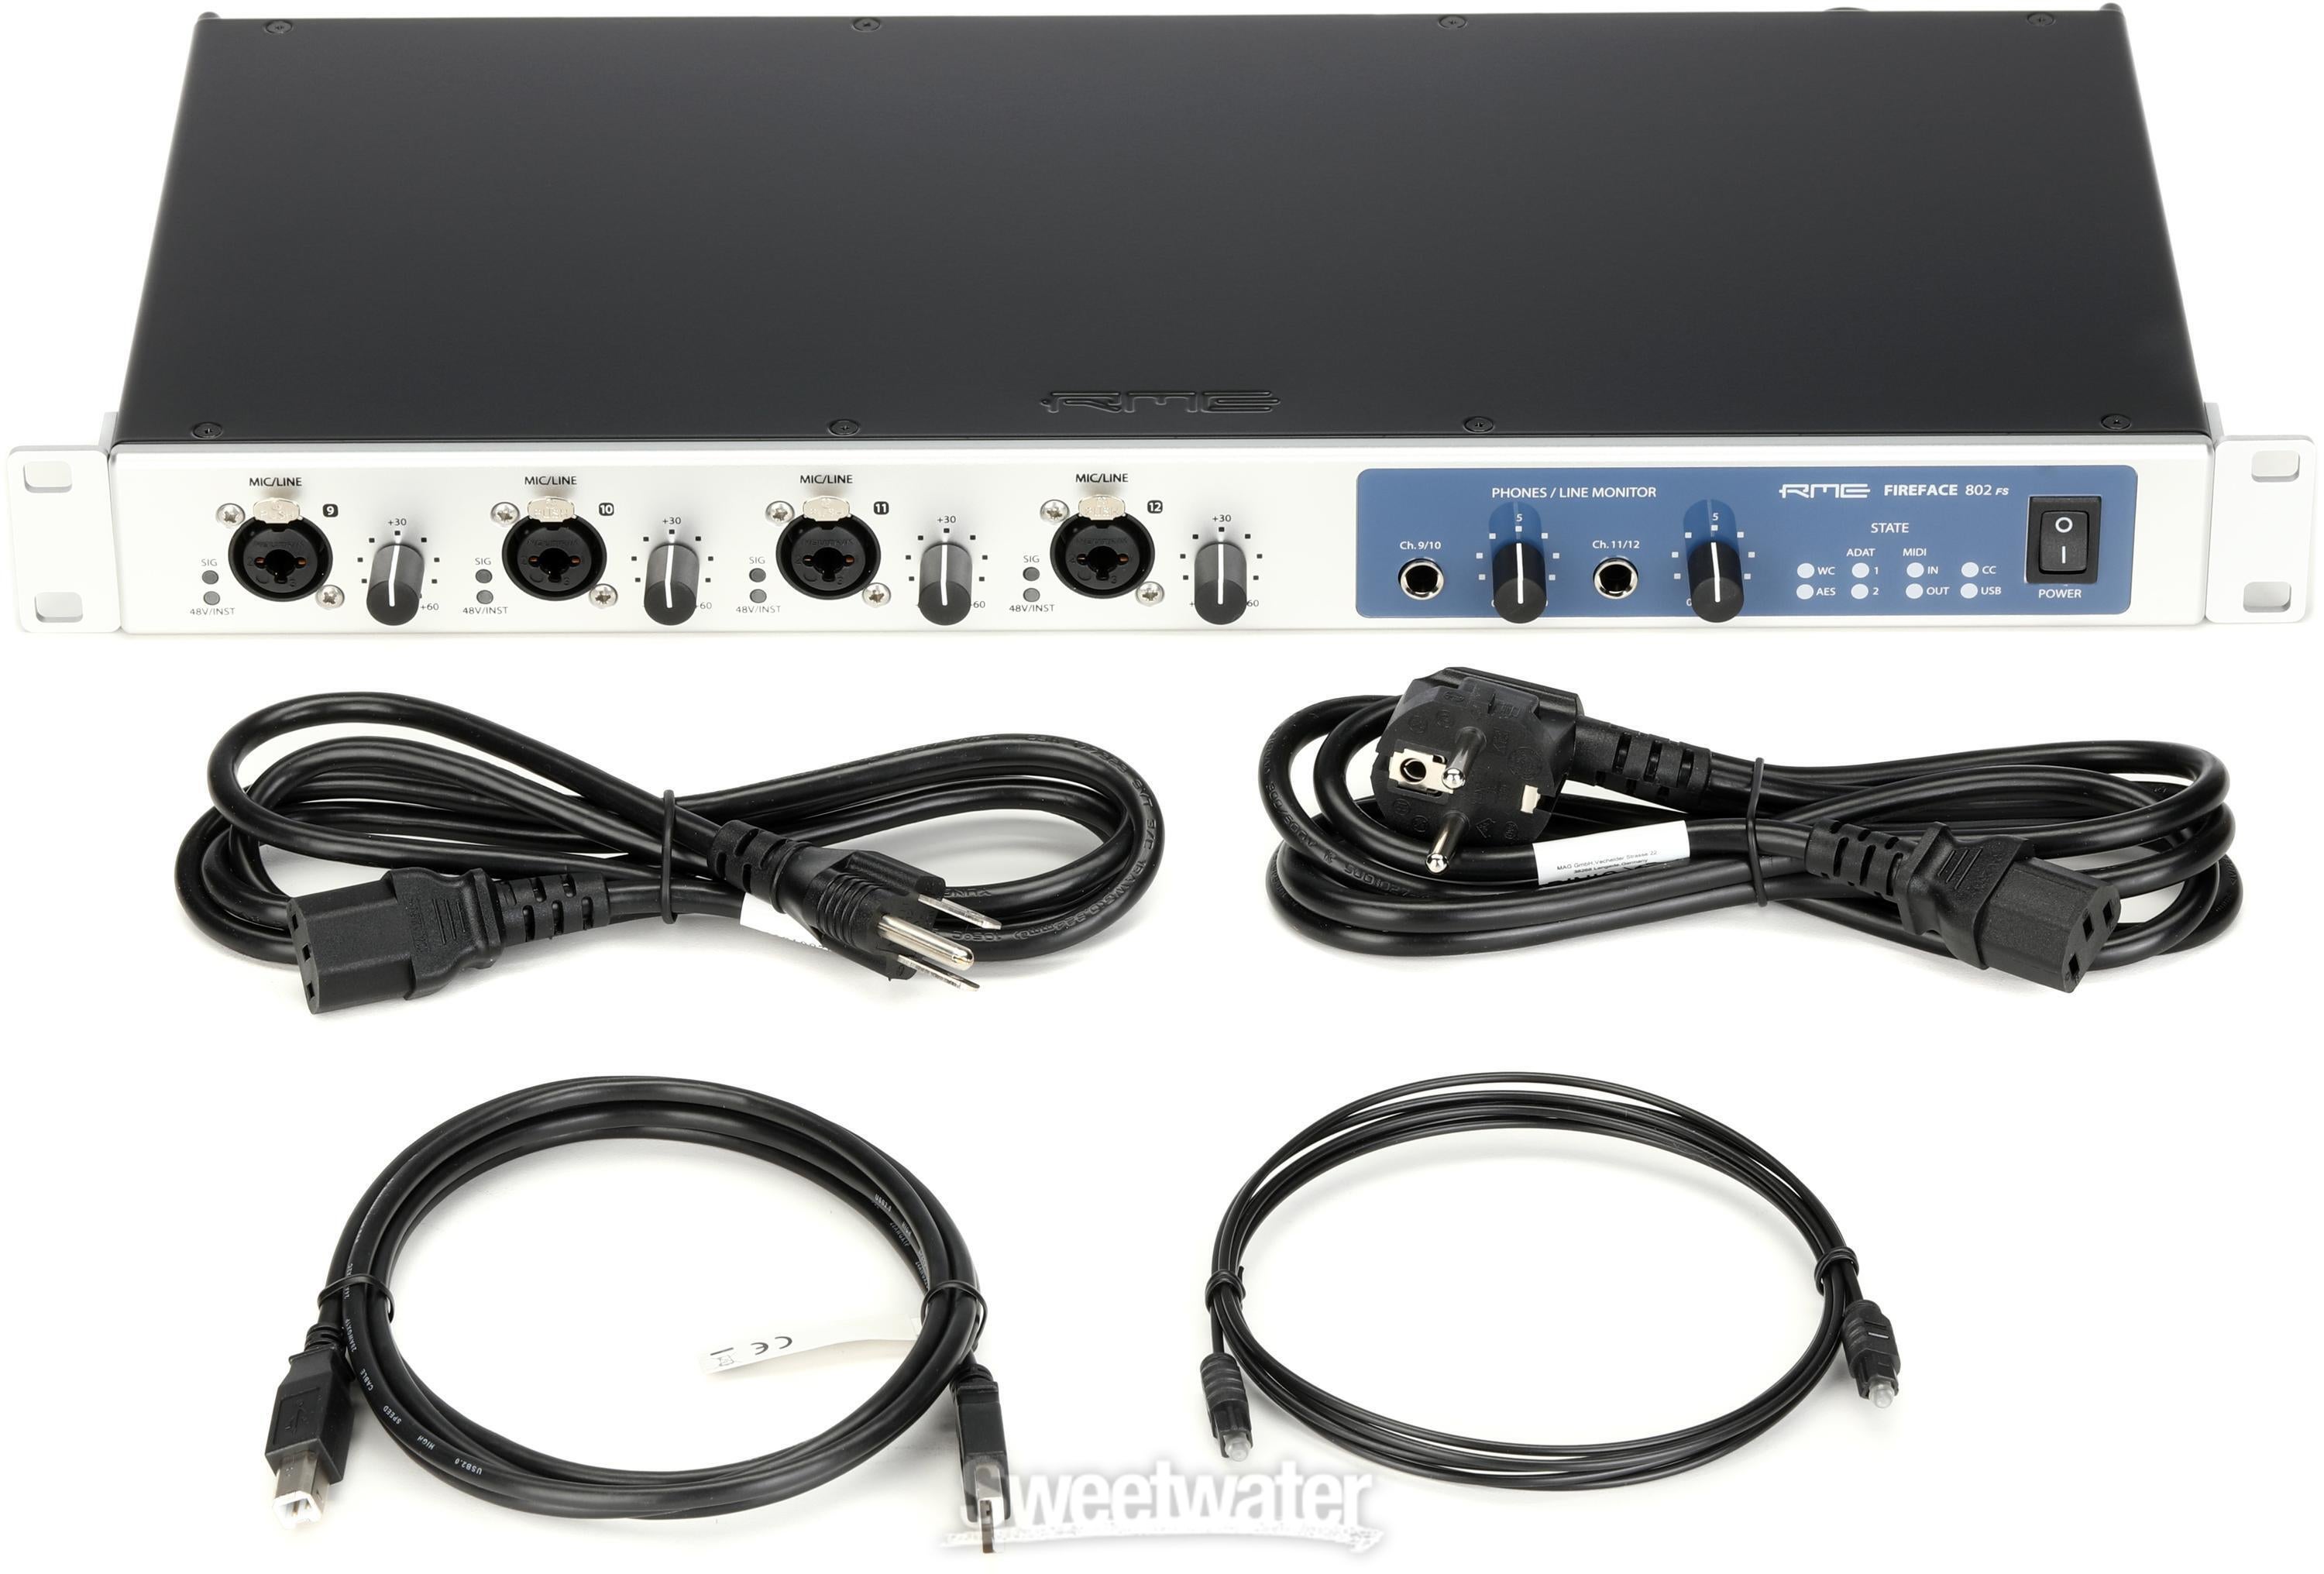 RME Fireface 802 FS USB 2.0 Audio Interface | Sweetwater